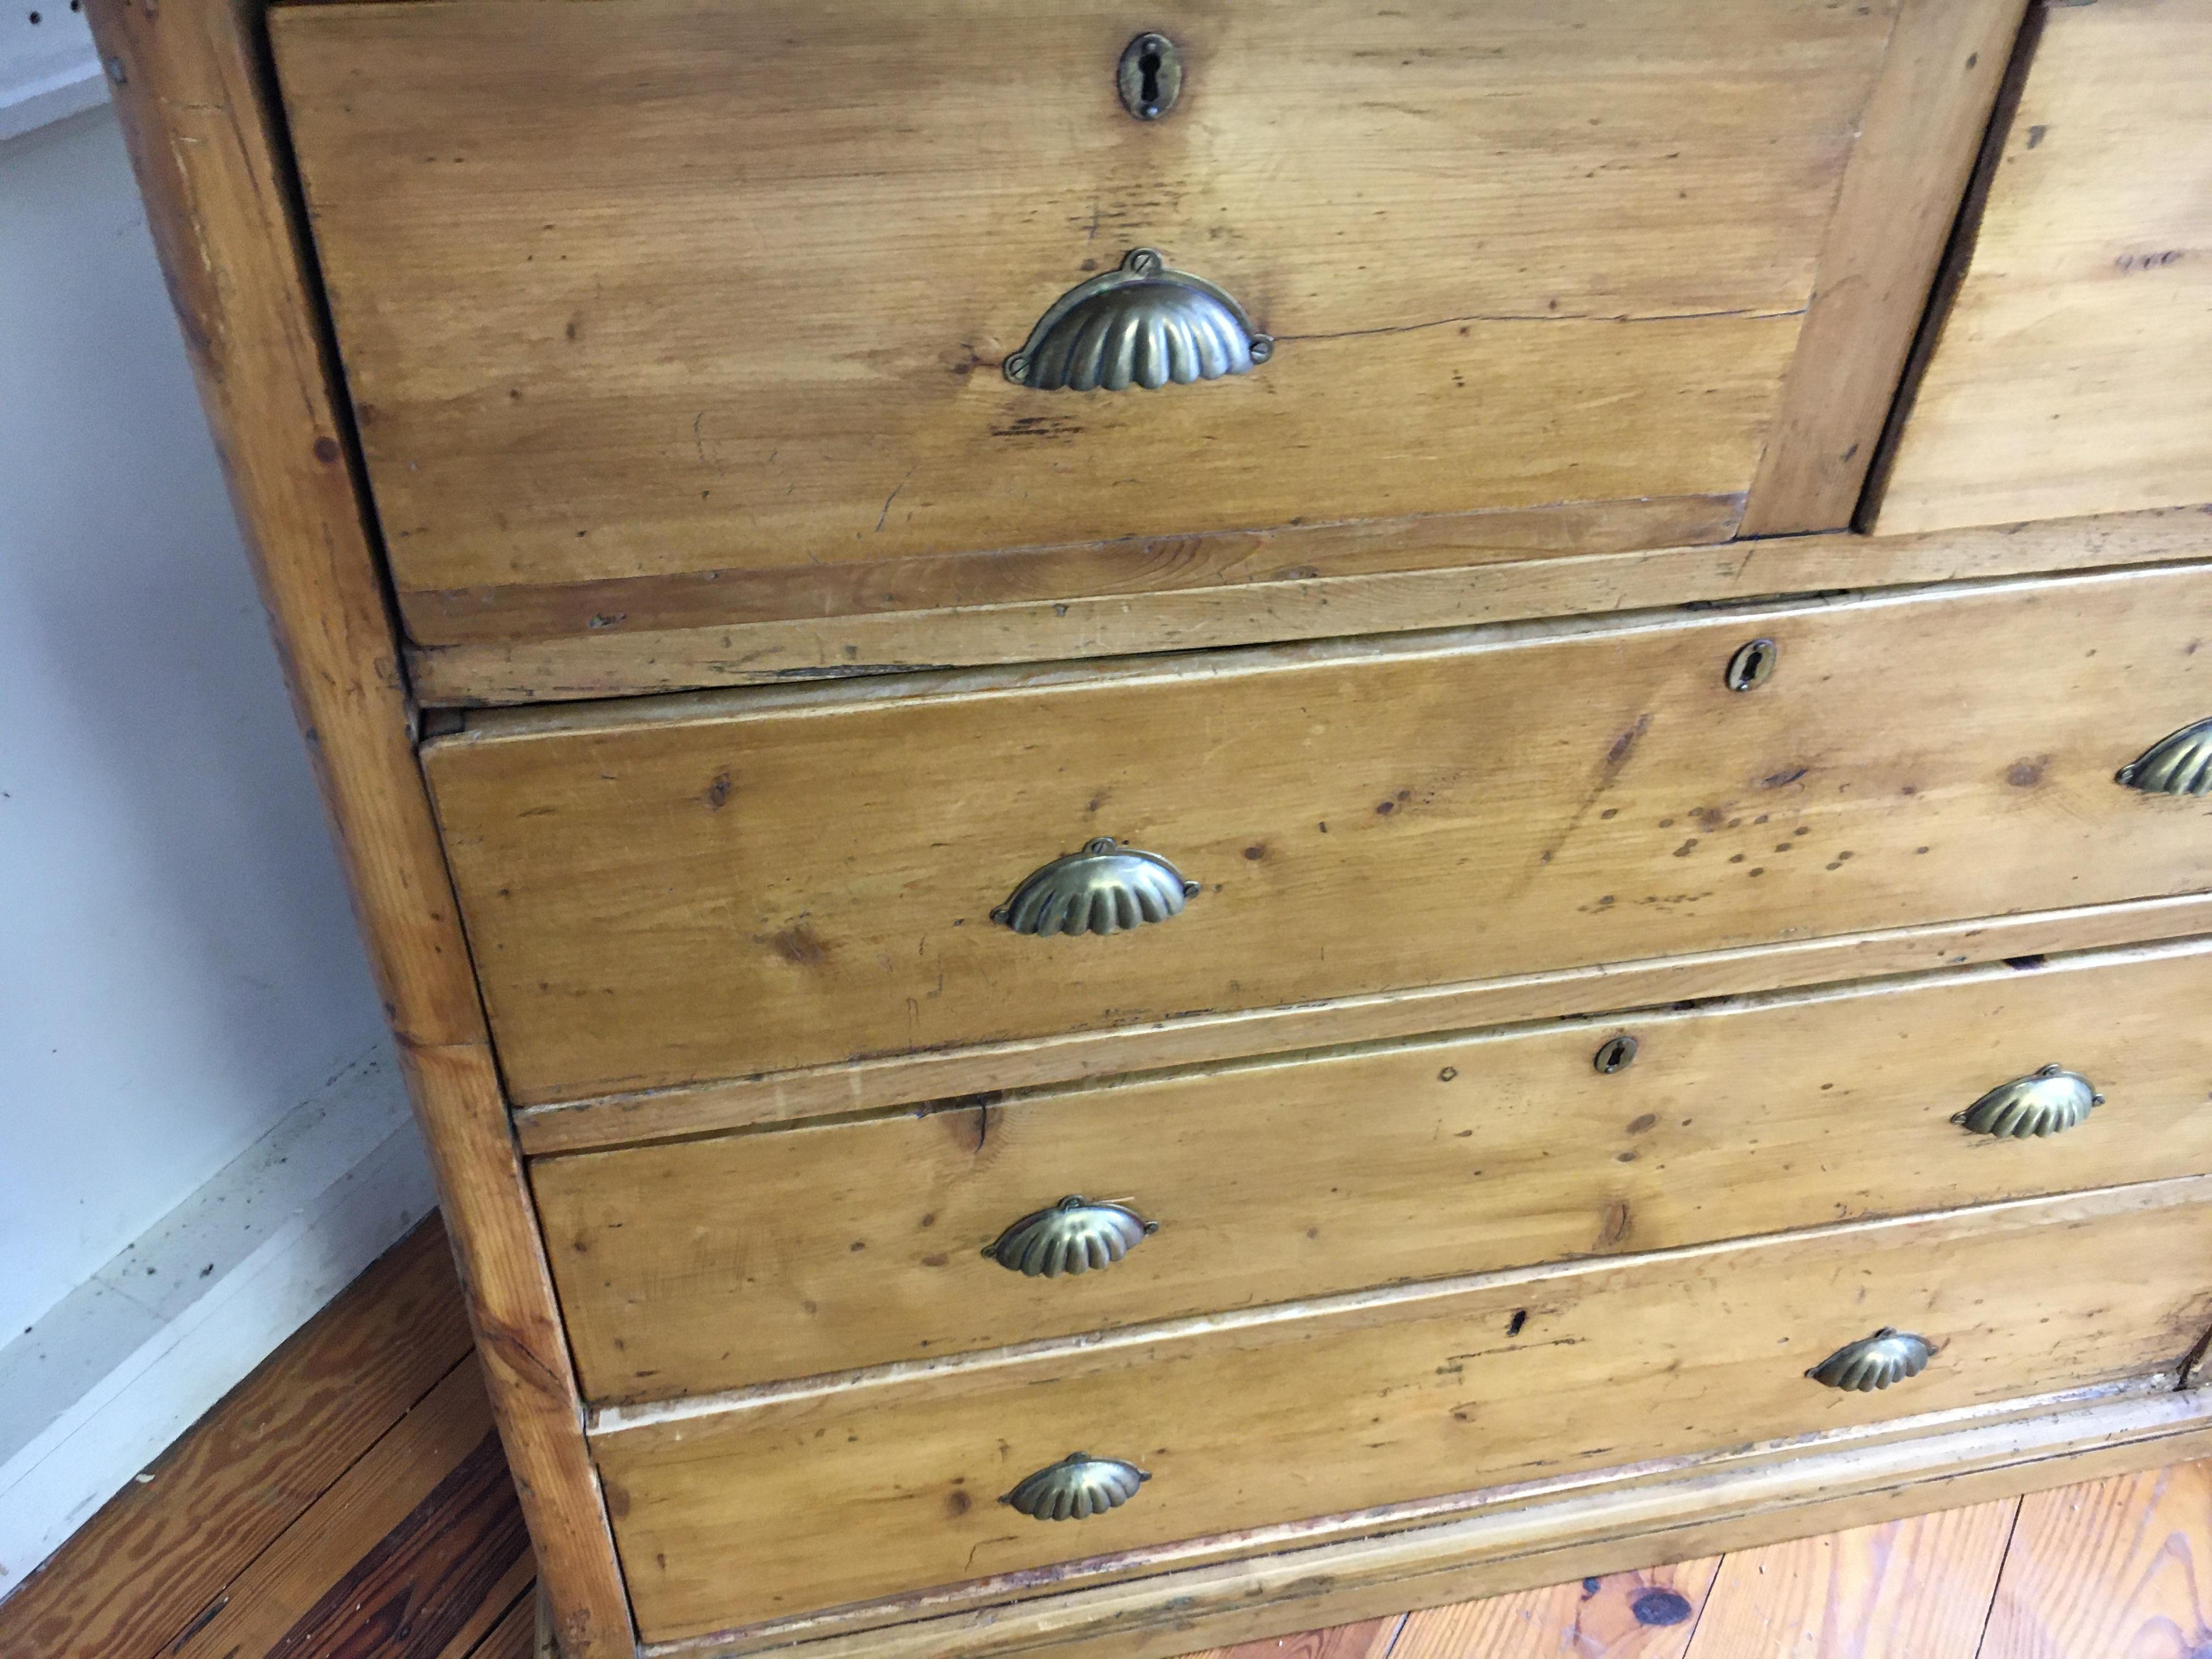 Pine - circa 1880 - We sell plenty of chest of Drawers. This one is special! With brass pulls and a great size for storage this COD has a very nice patina. Three very large drawers on the bottom and two smaller drawers on top. These drawers open and